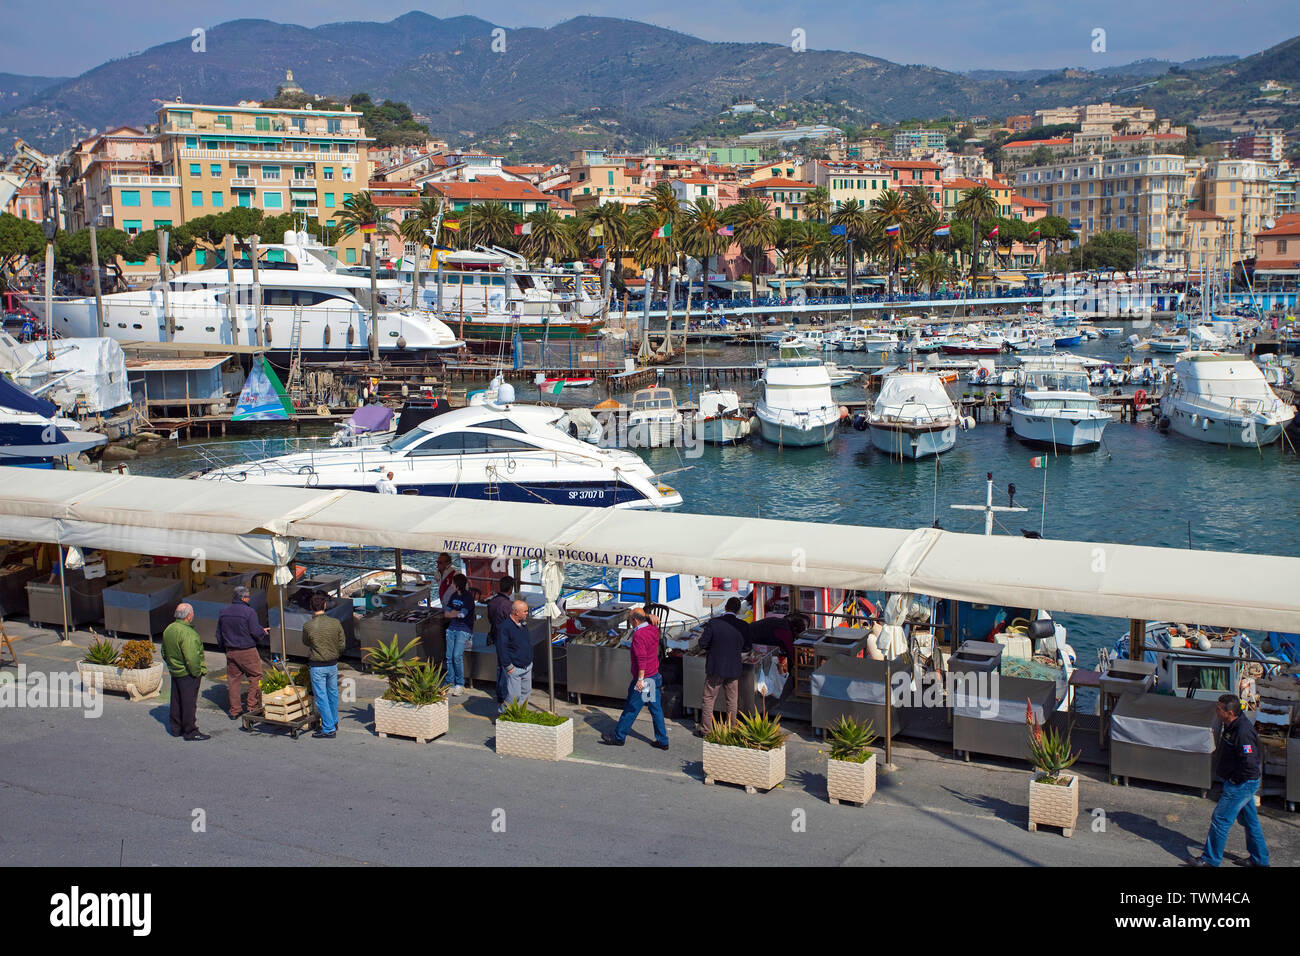 Fish market at the harbour of San Remo, harbour town at the ligurian coast, Liguria, Italy Stock Photo